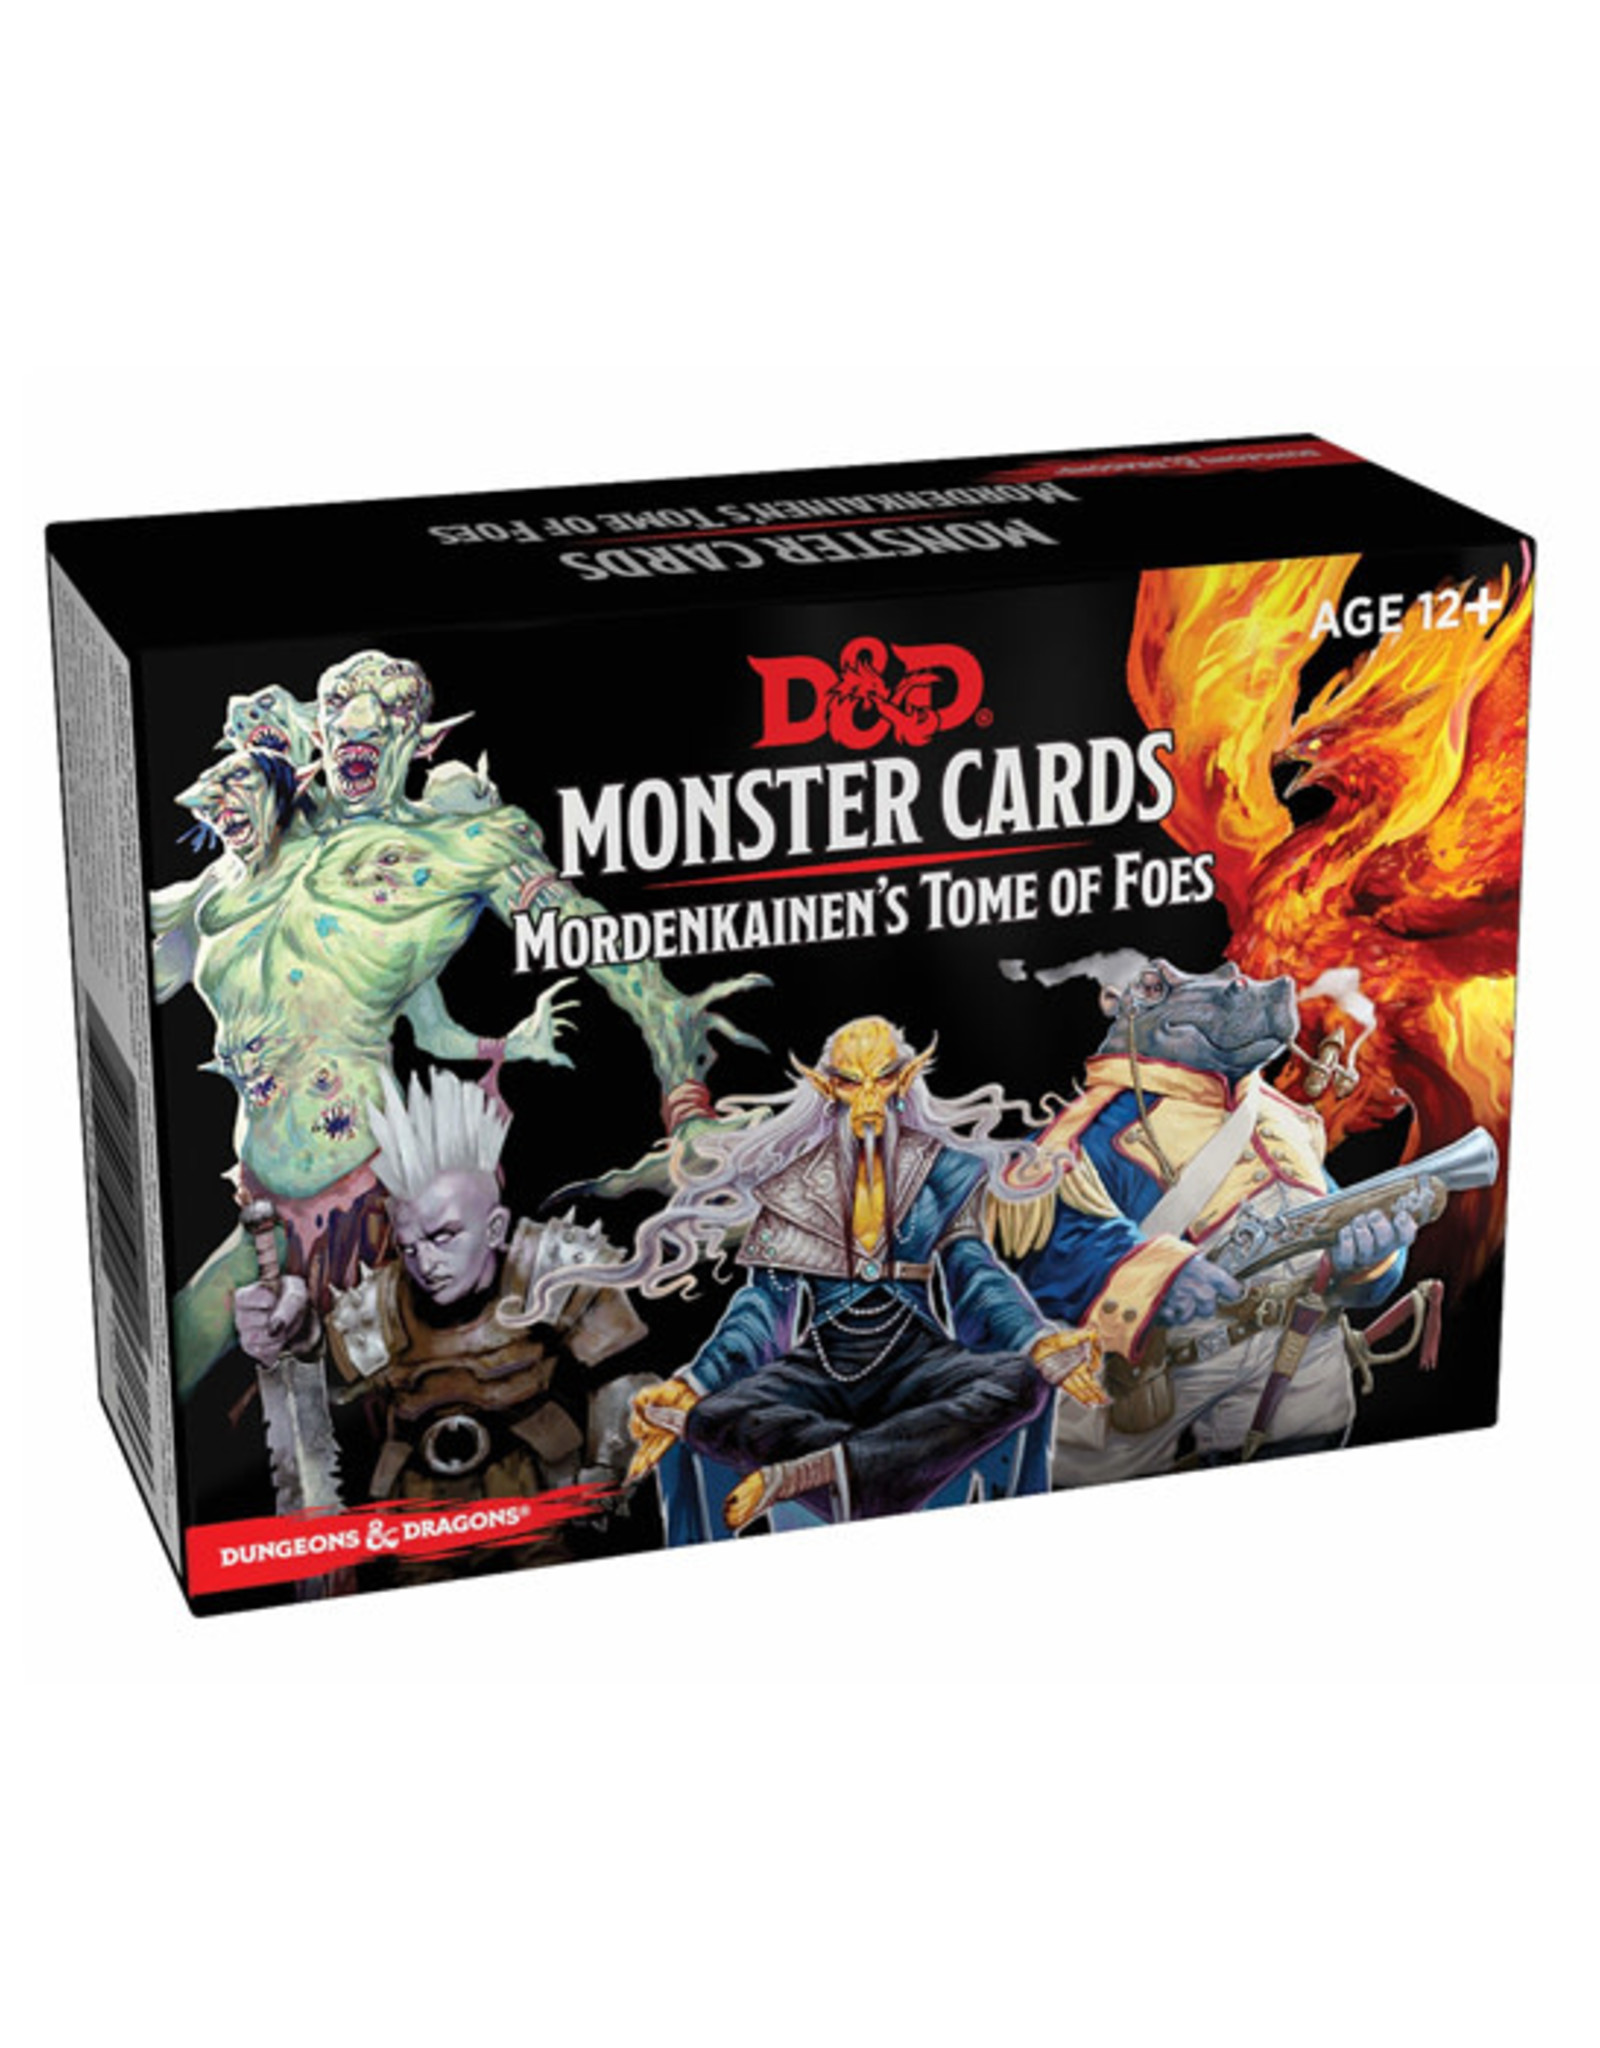 Dungeons & Dragons Dungeons & Dragons: 5th Edition - Monster Cards - Mordenkainen's Tome of Foes